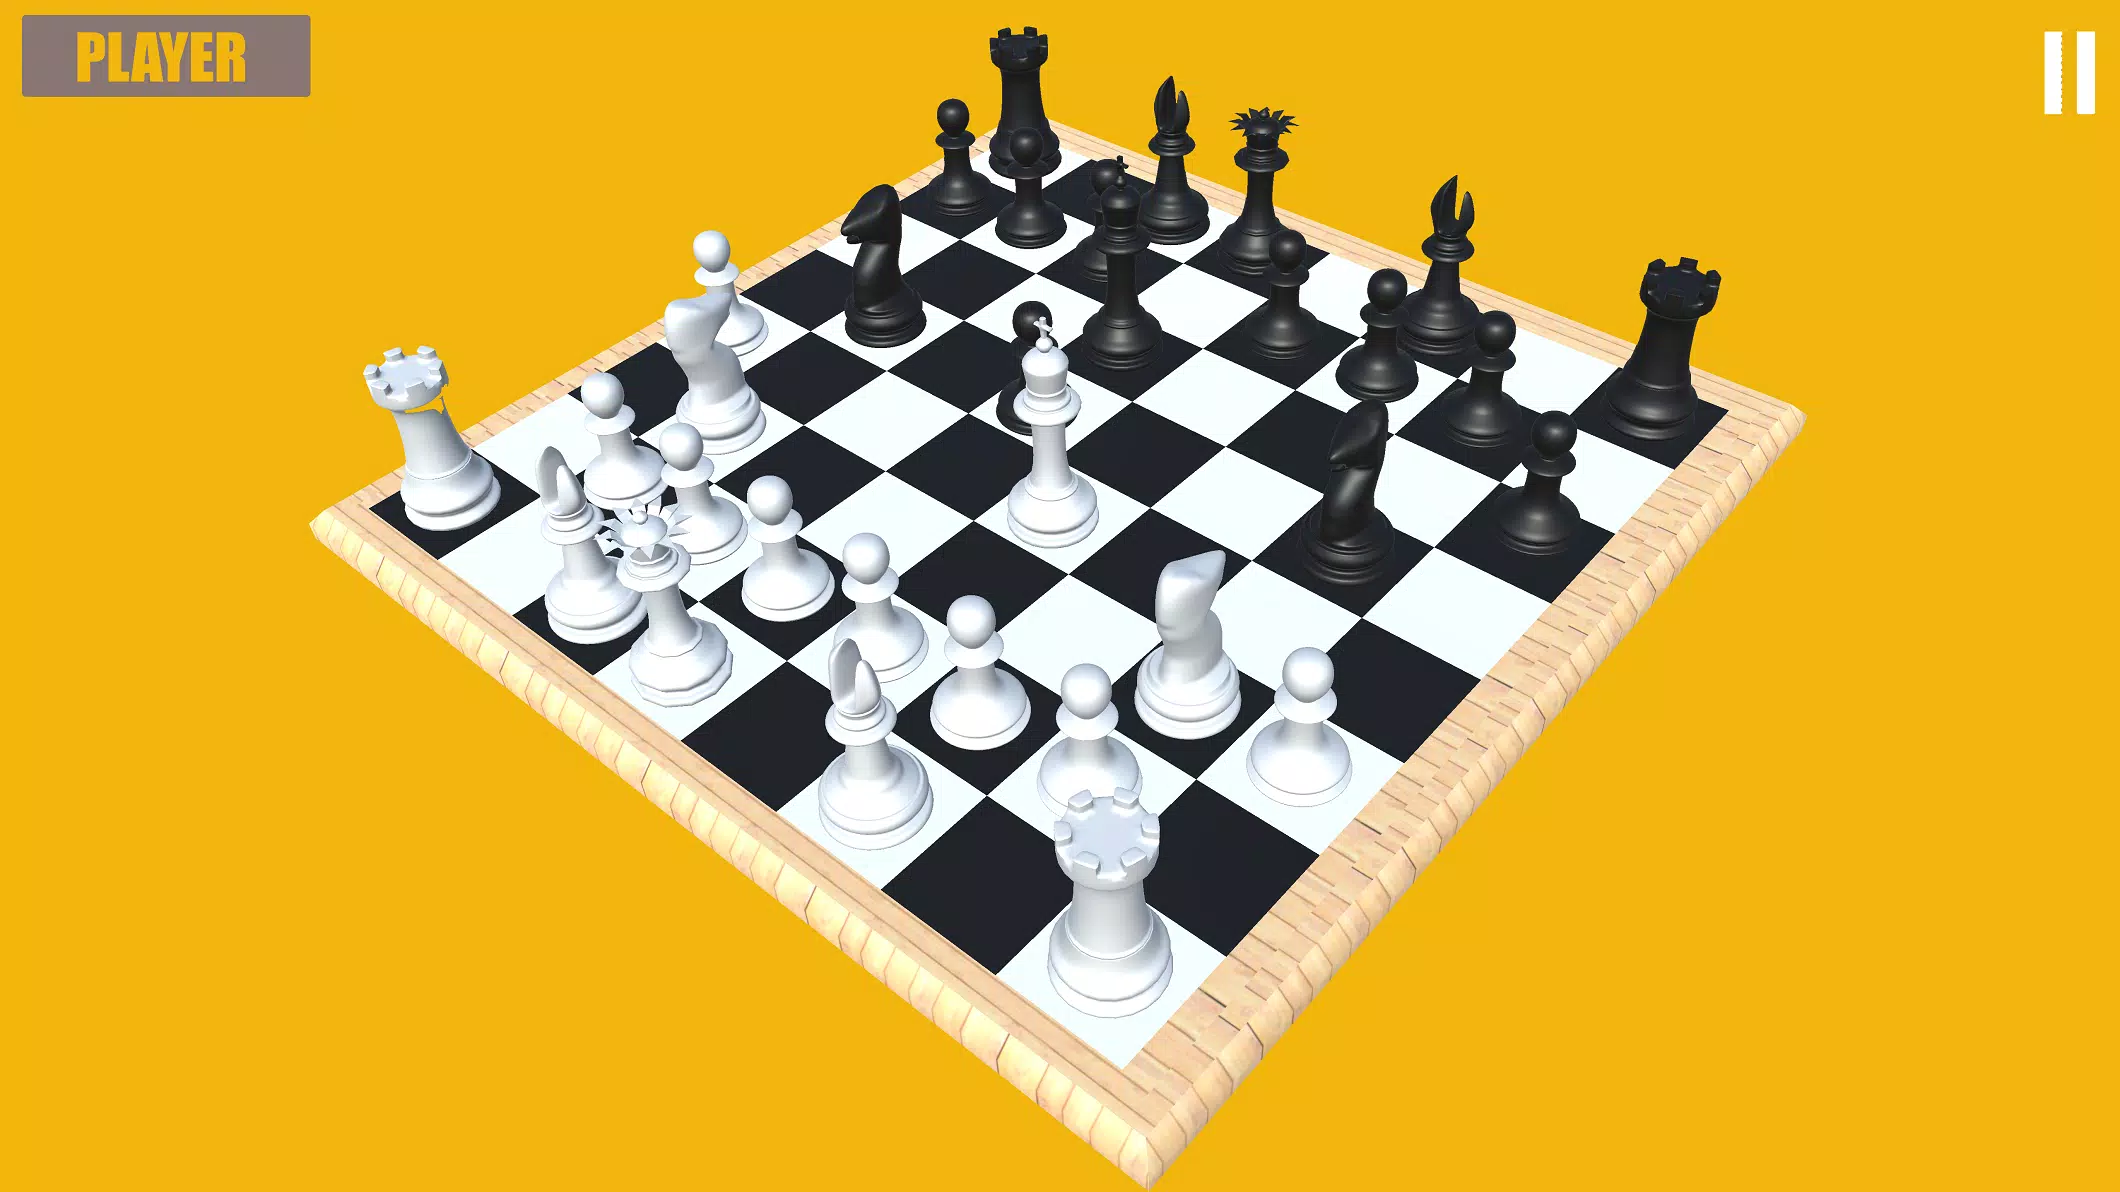 Free SparkChess APK Download For Android